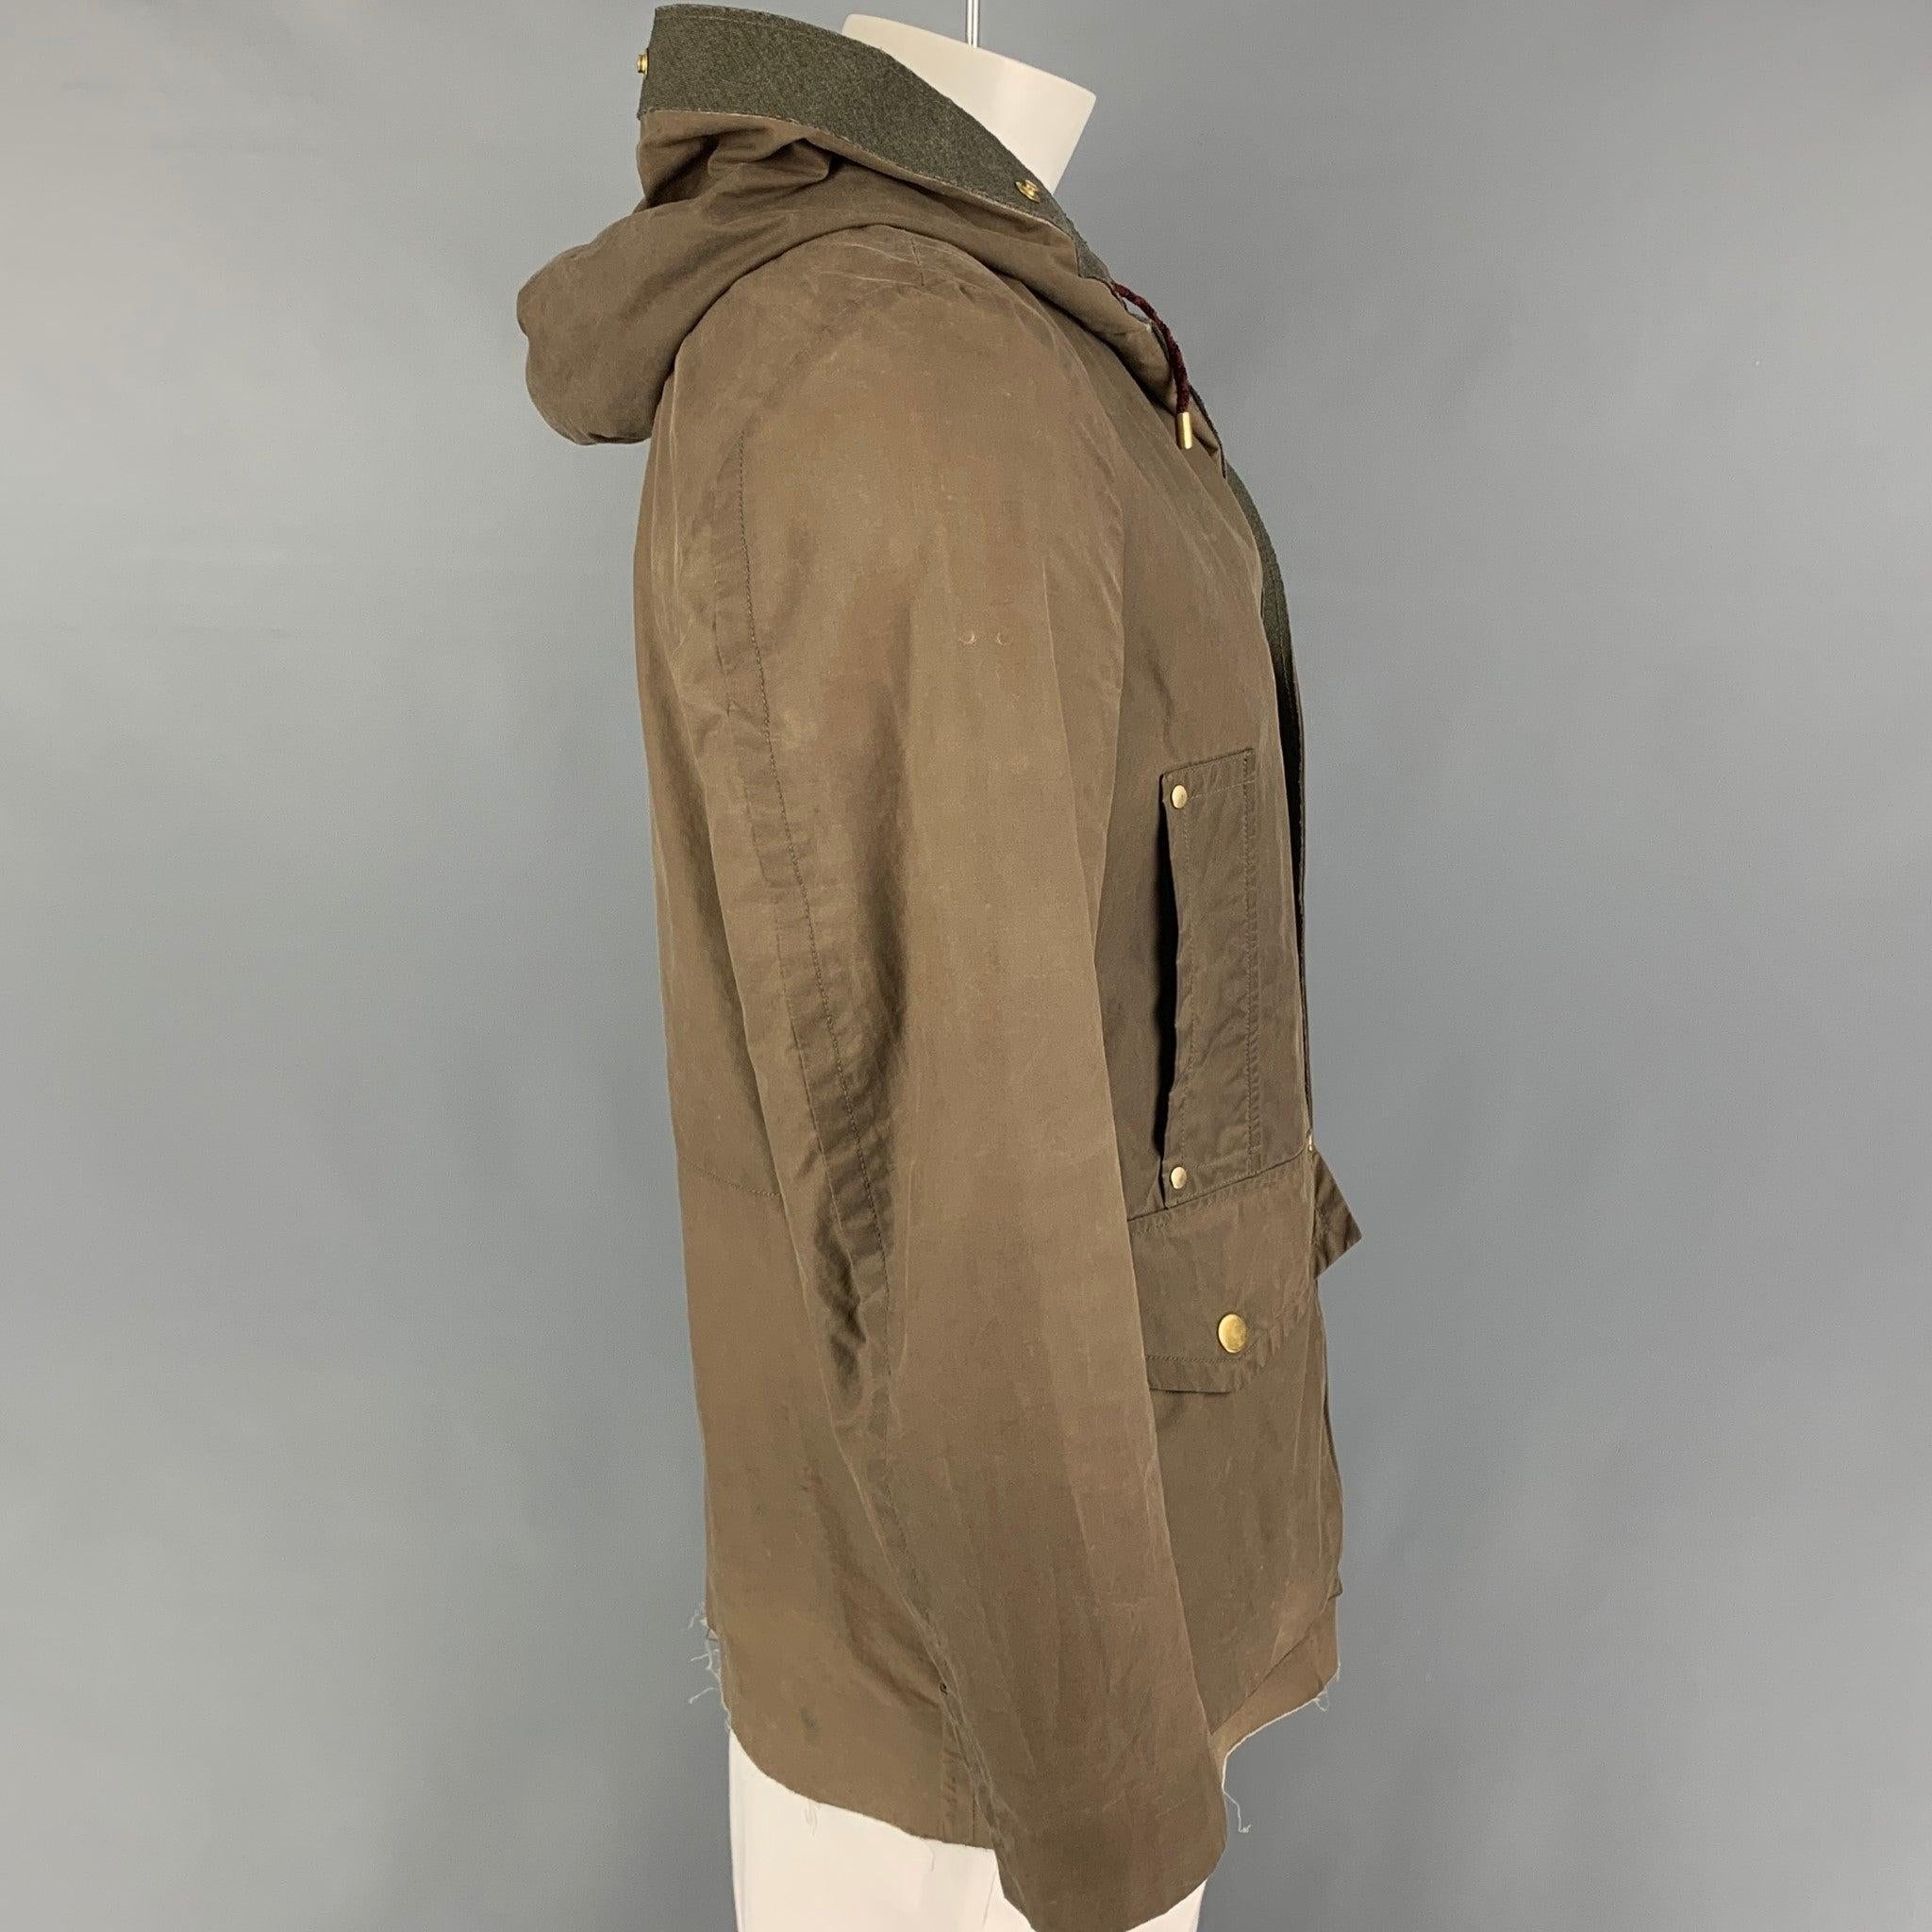 MARC JACOBS jacket comes in a olive cotton featuring a hooded style, front pockets, and a snap button closure. Made in Italy.
Very Good
Pre-Owned Condition. 

Marked:   46 

Measurements: 
 
Shoulder: 18.5 inches Chest: 44 inches Sleeve: 25 inches